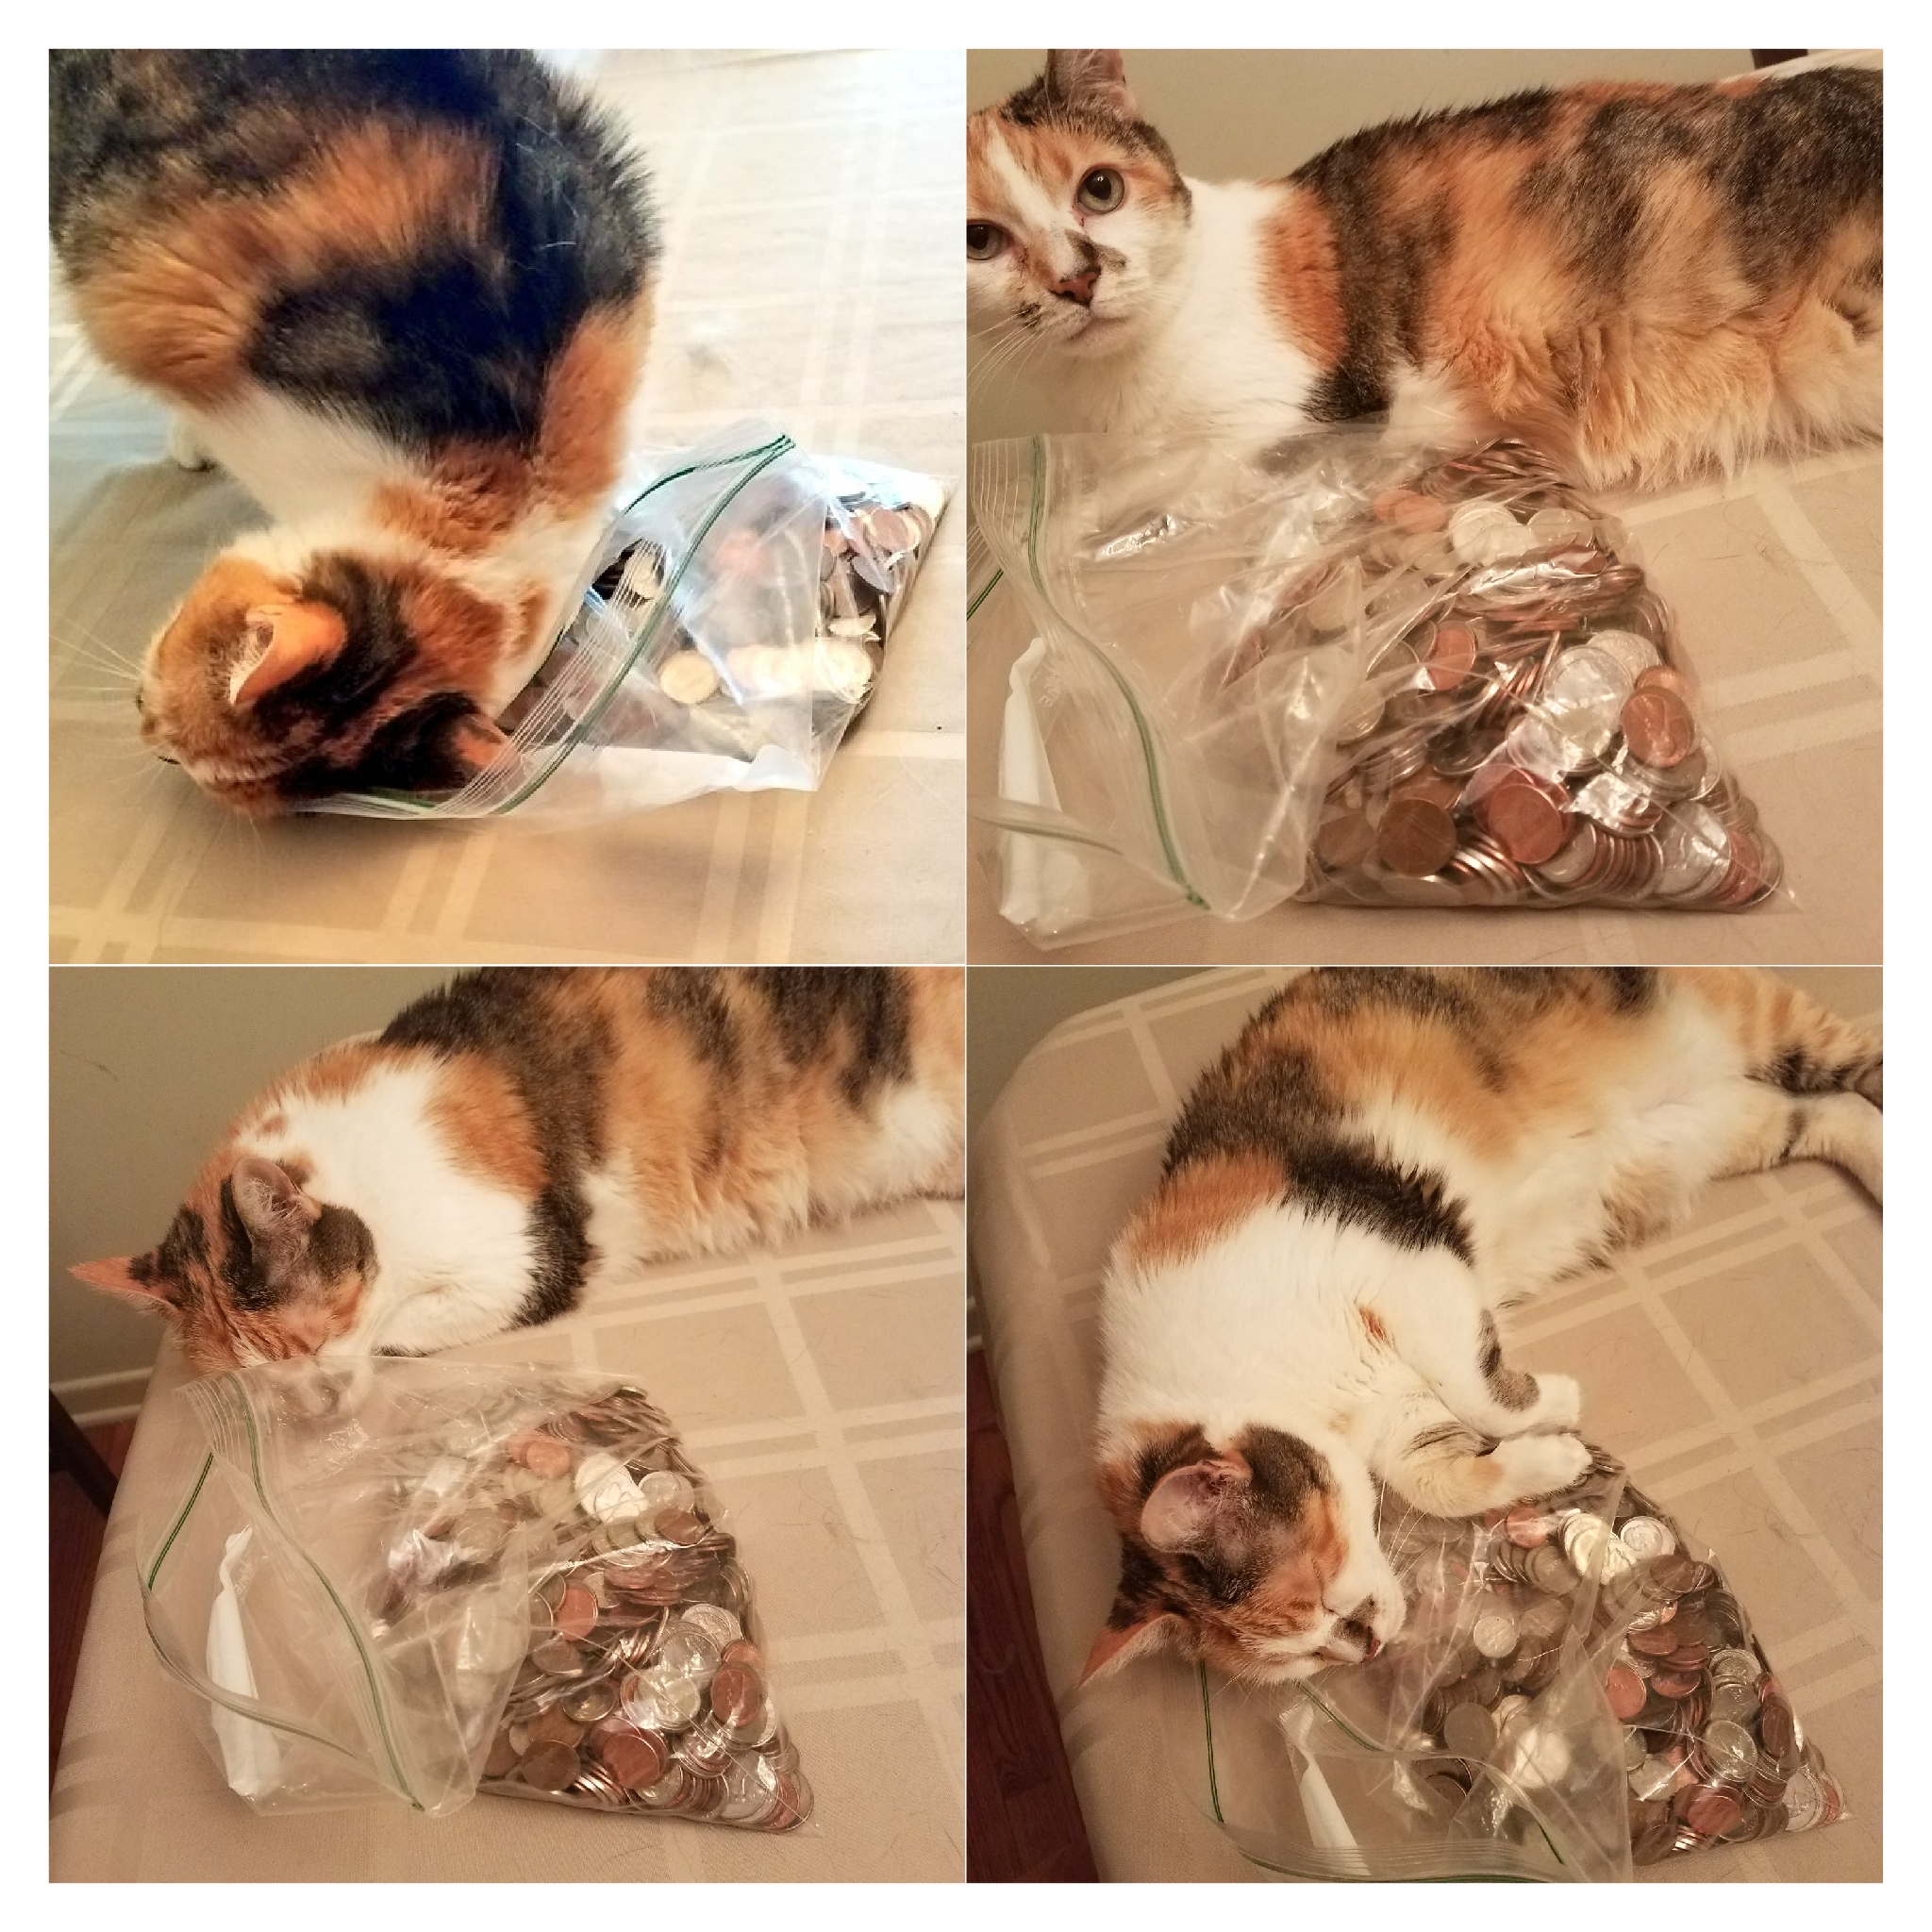 Cat that loves a bag of money.